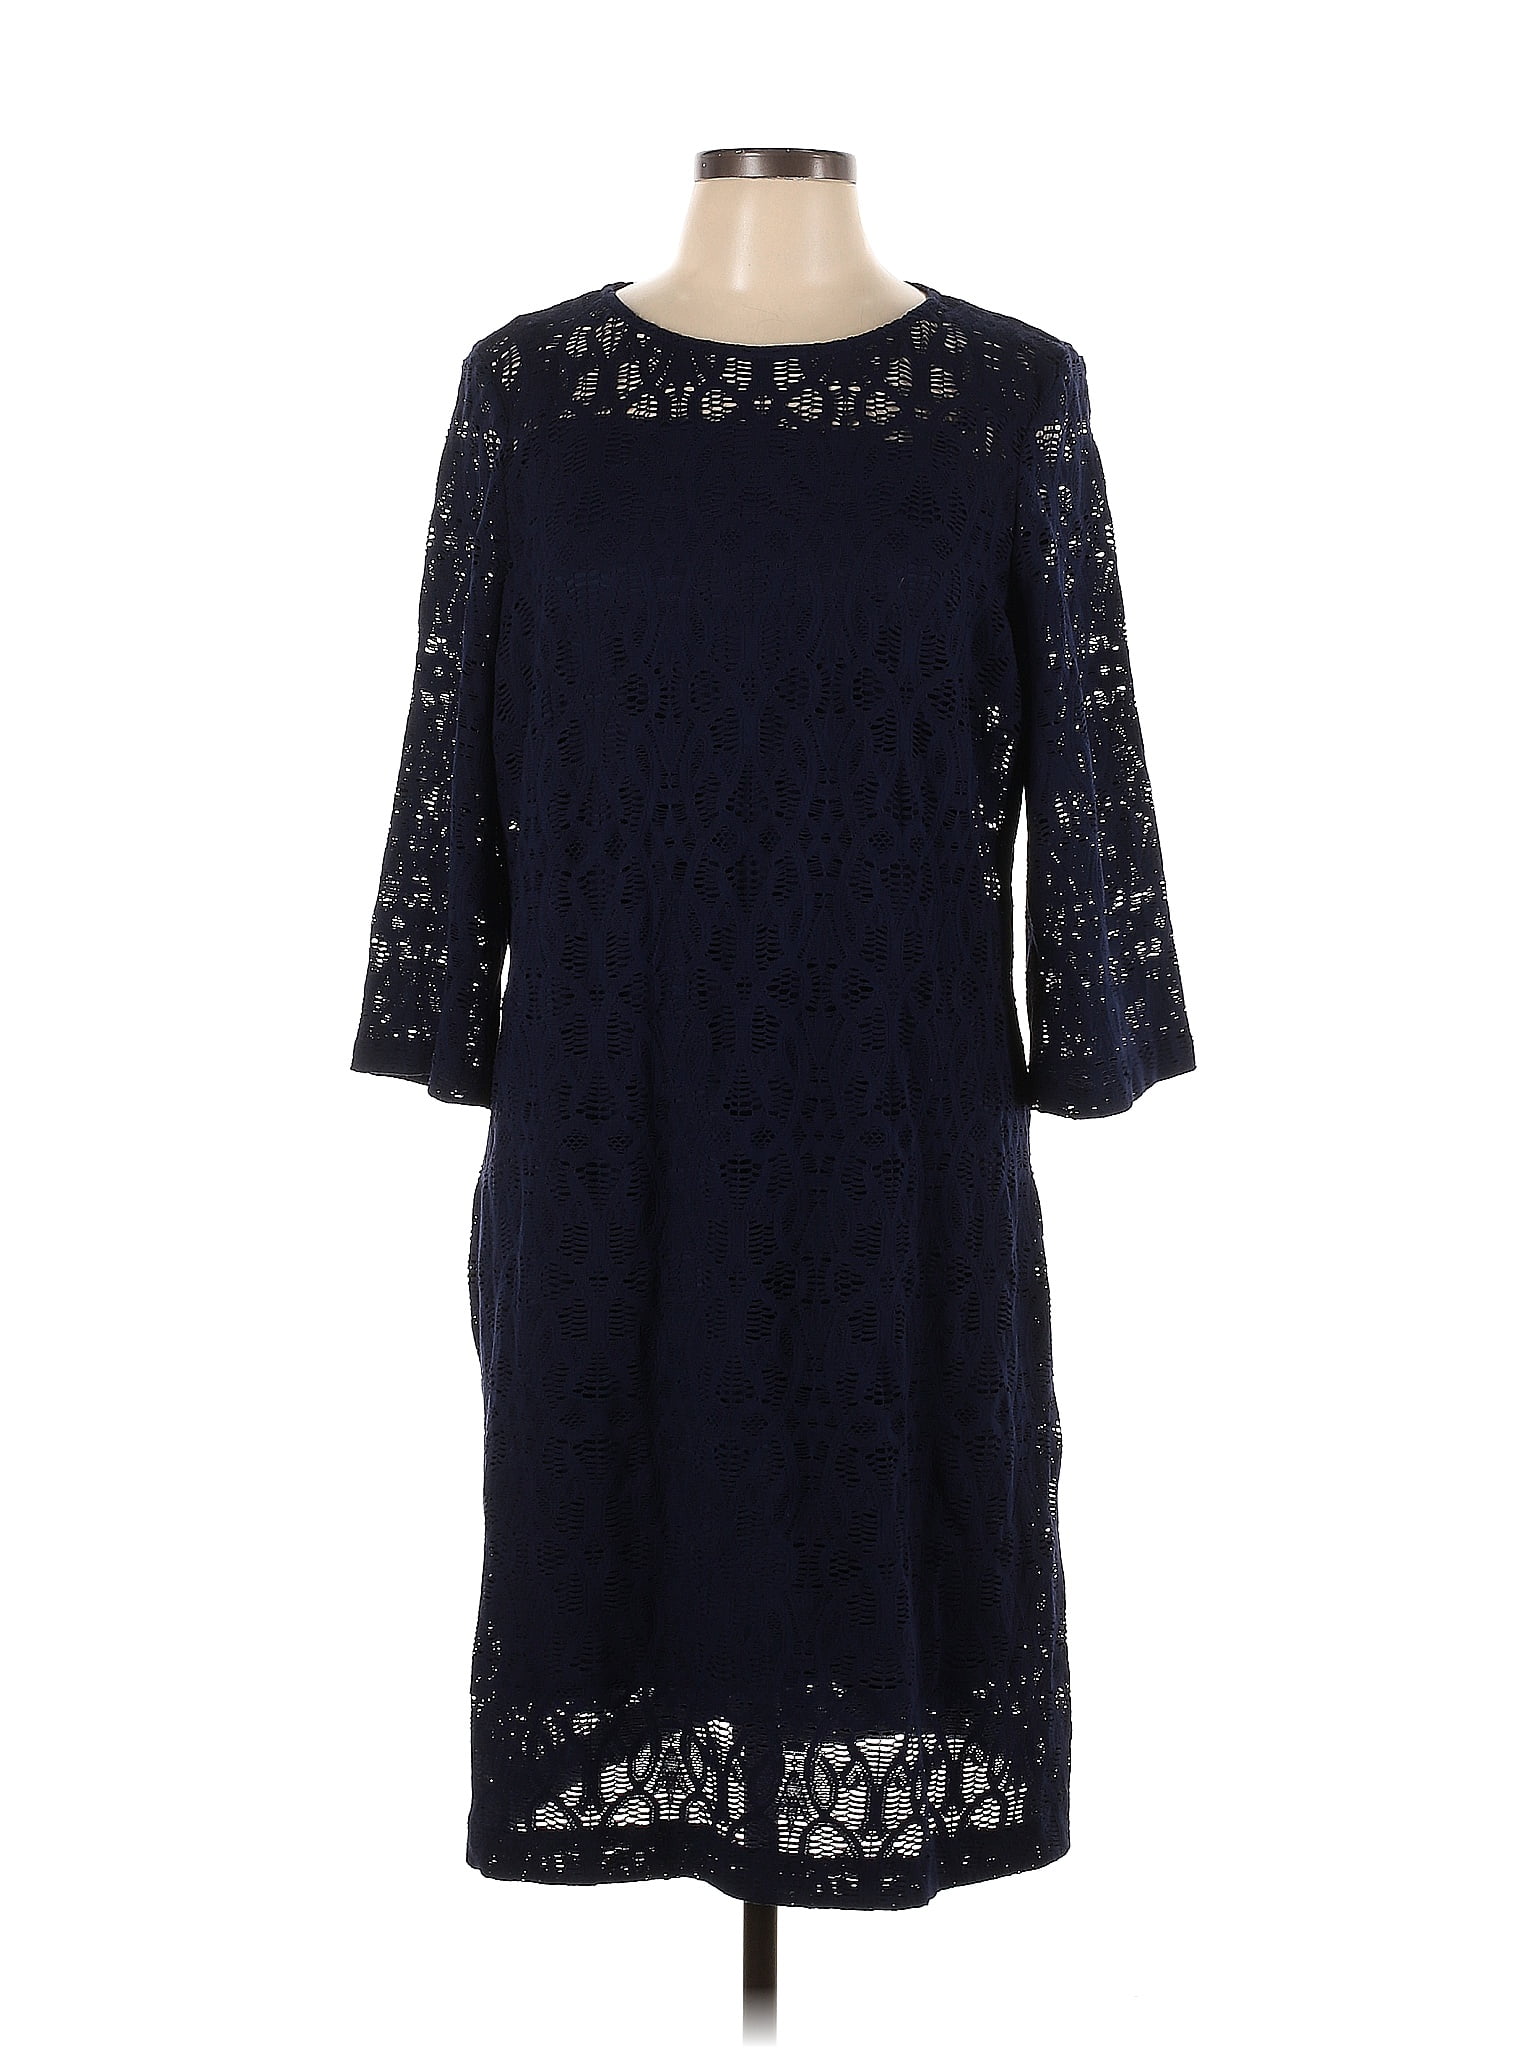 Chico's Solid Navy Blue Casual Dress Size Lg (2) - 77% off | thredUP